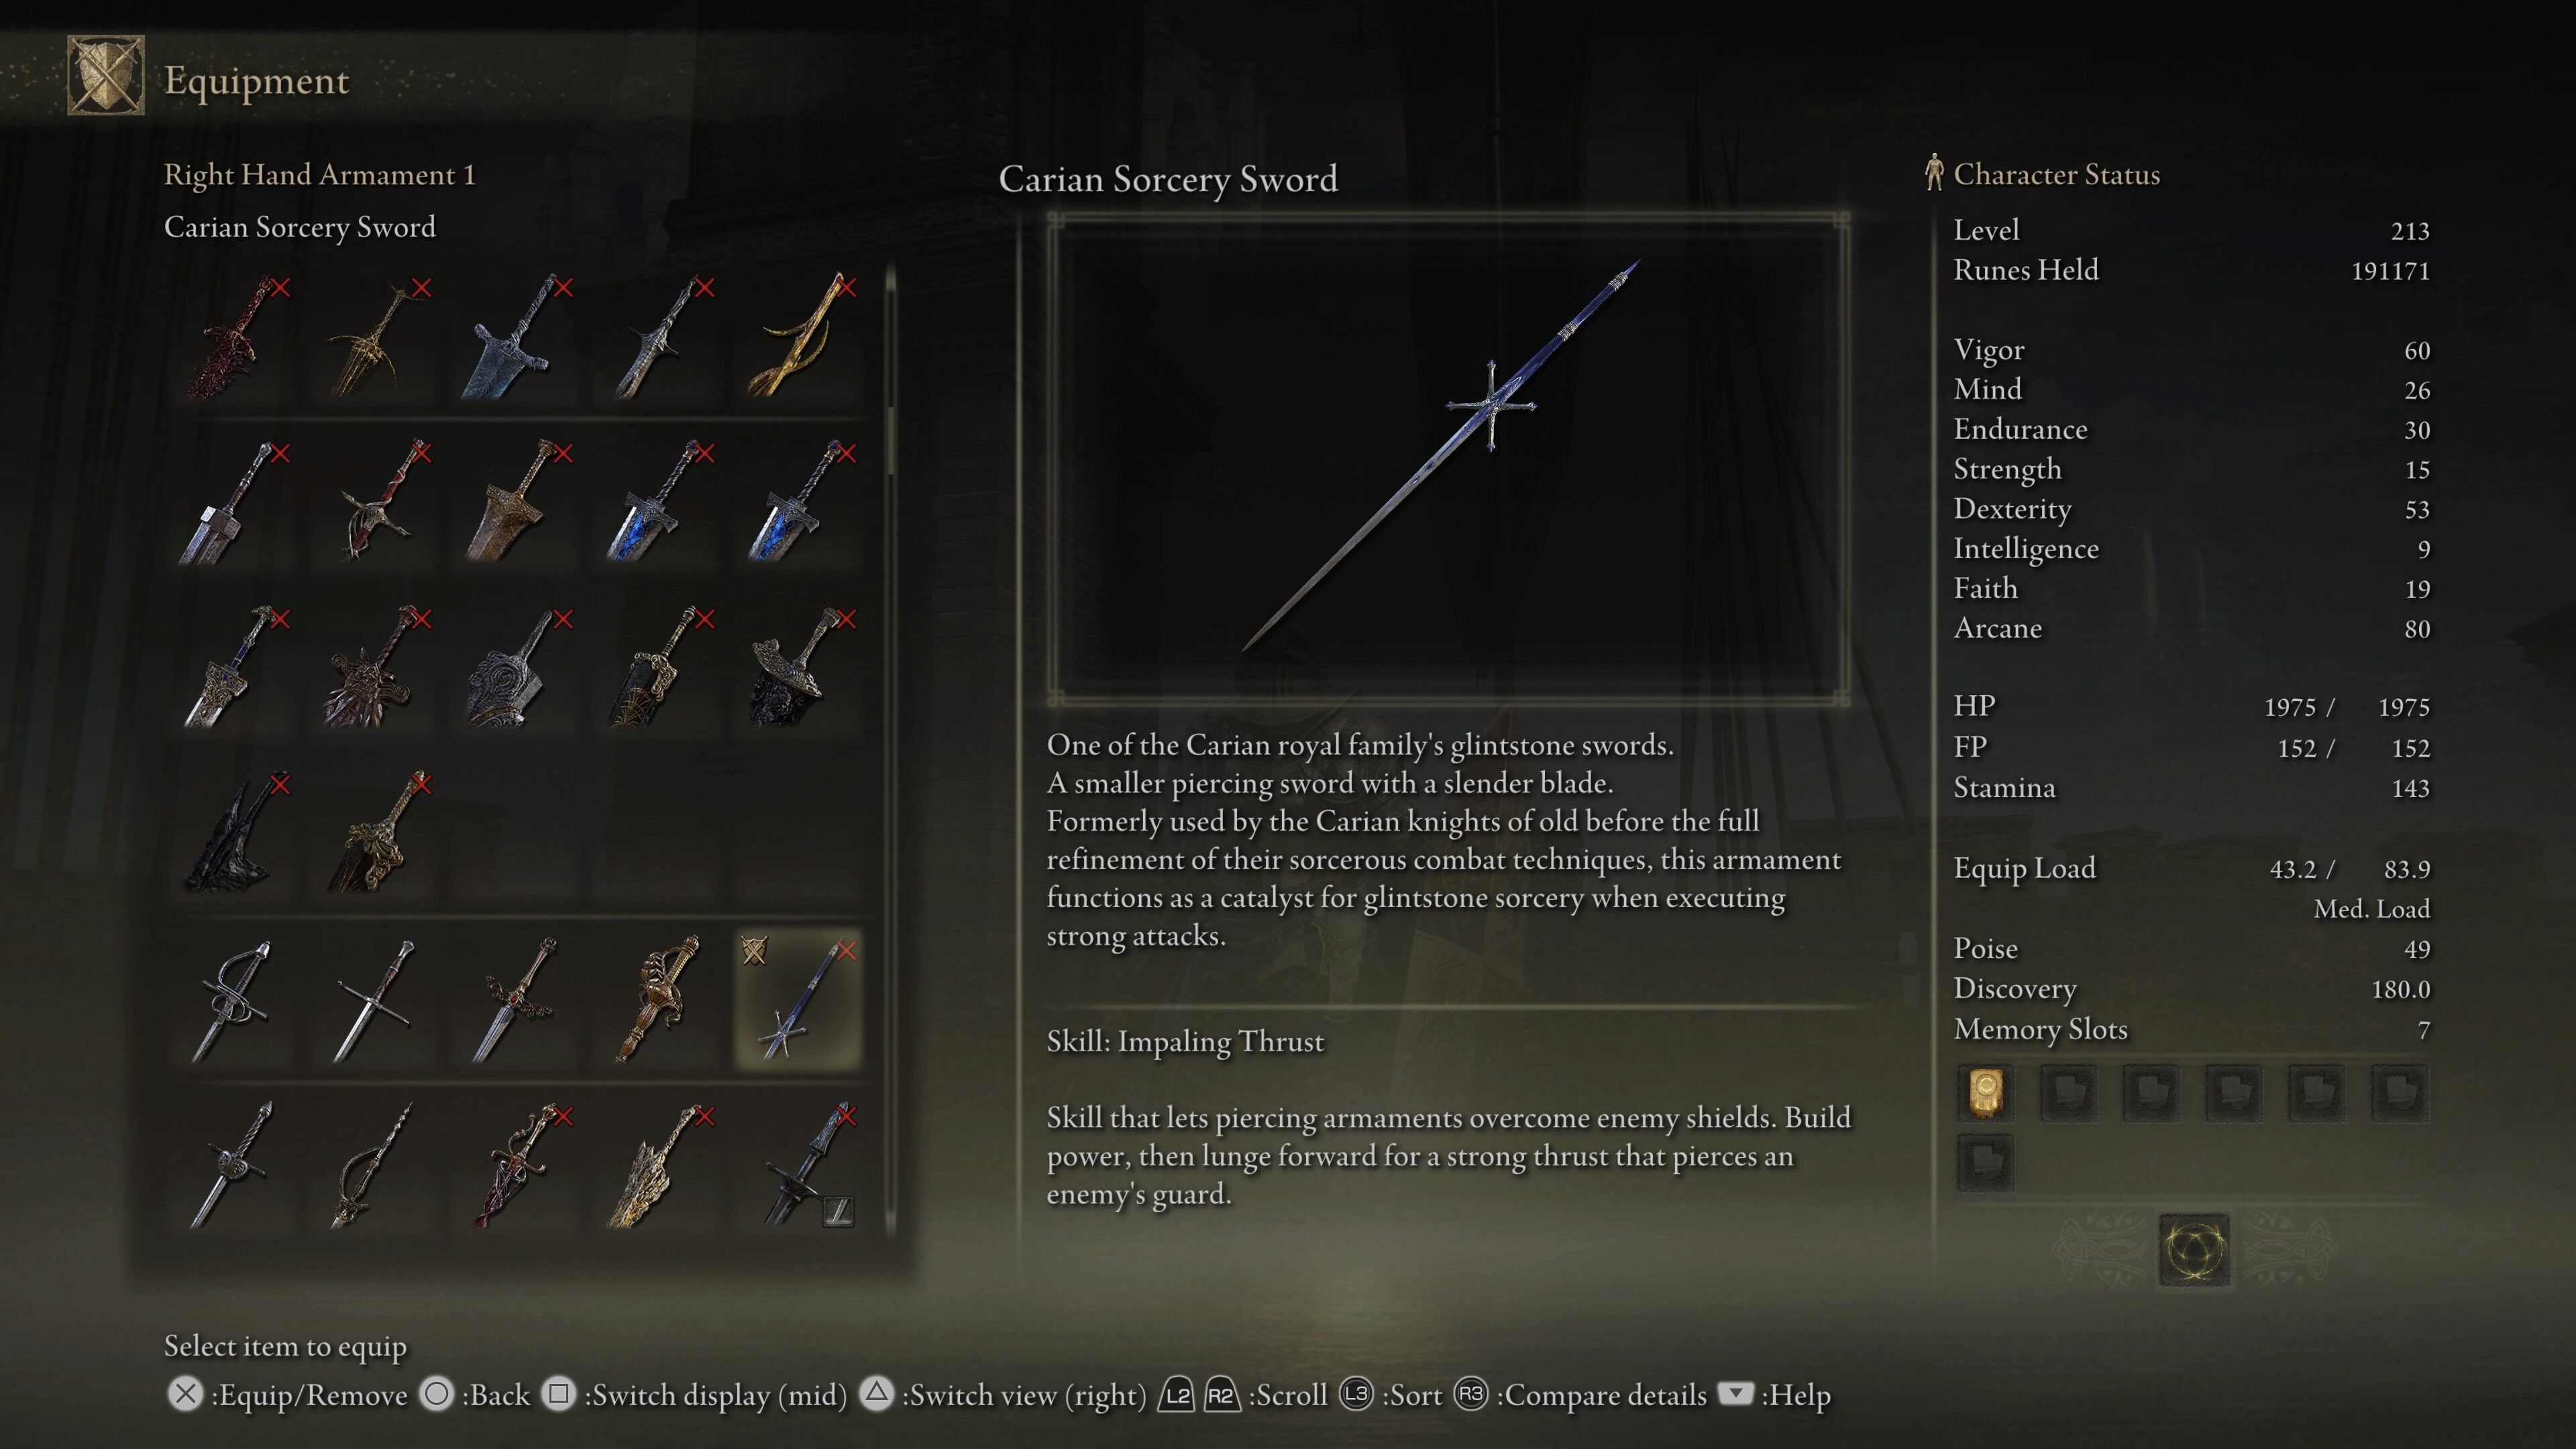 elden ring shadow of the erdtree how to get carian sorcery sword - info of the weapon in-game.